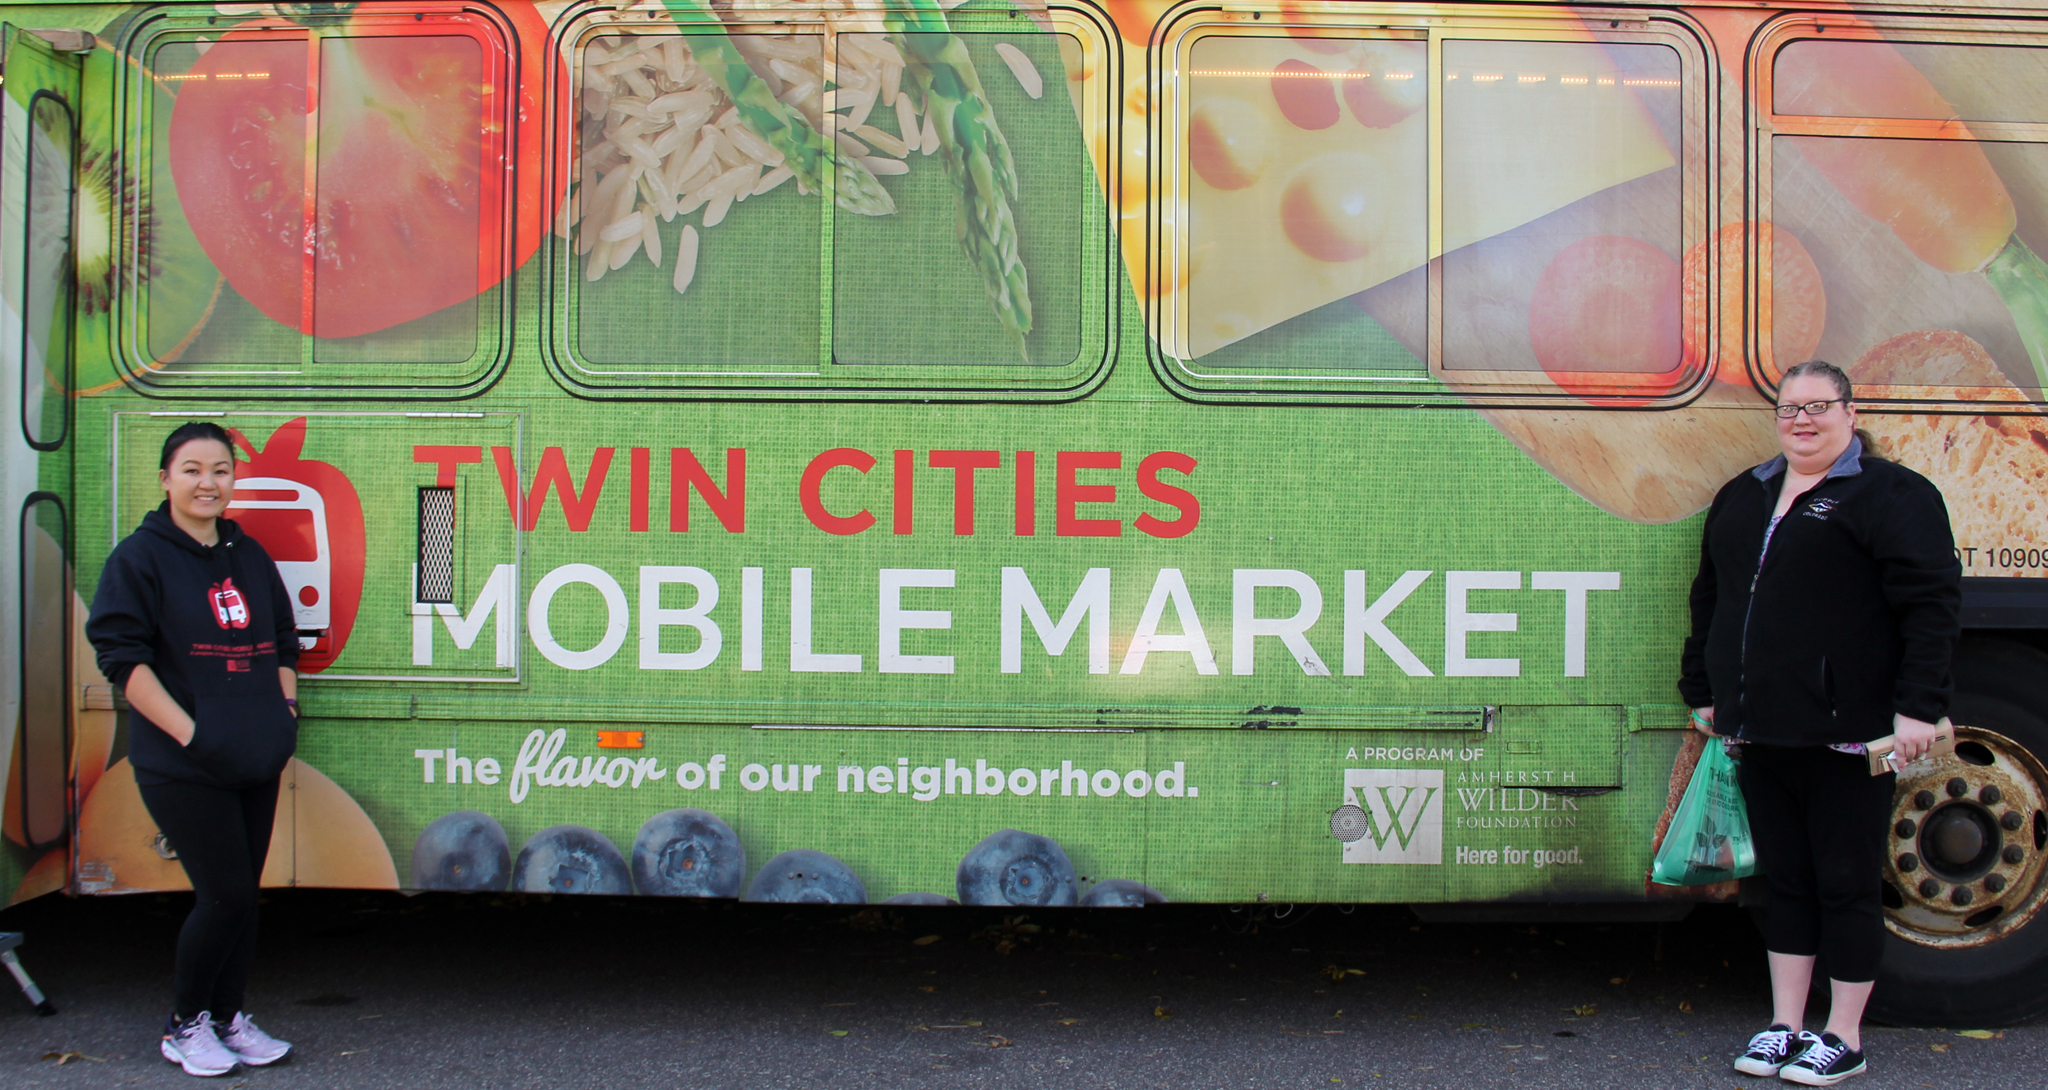 Two women standing in front of a Twin Cities Mobile Market bus